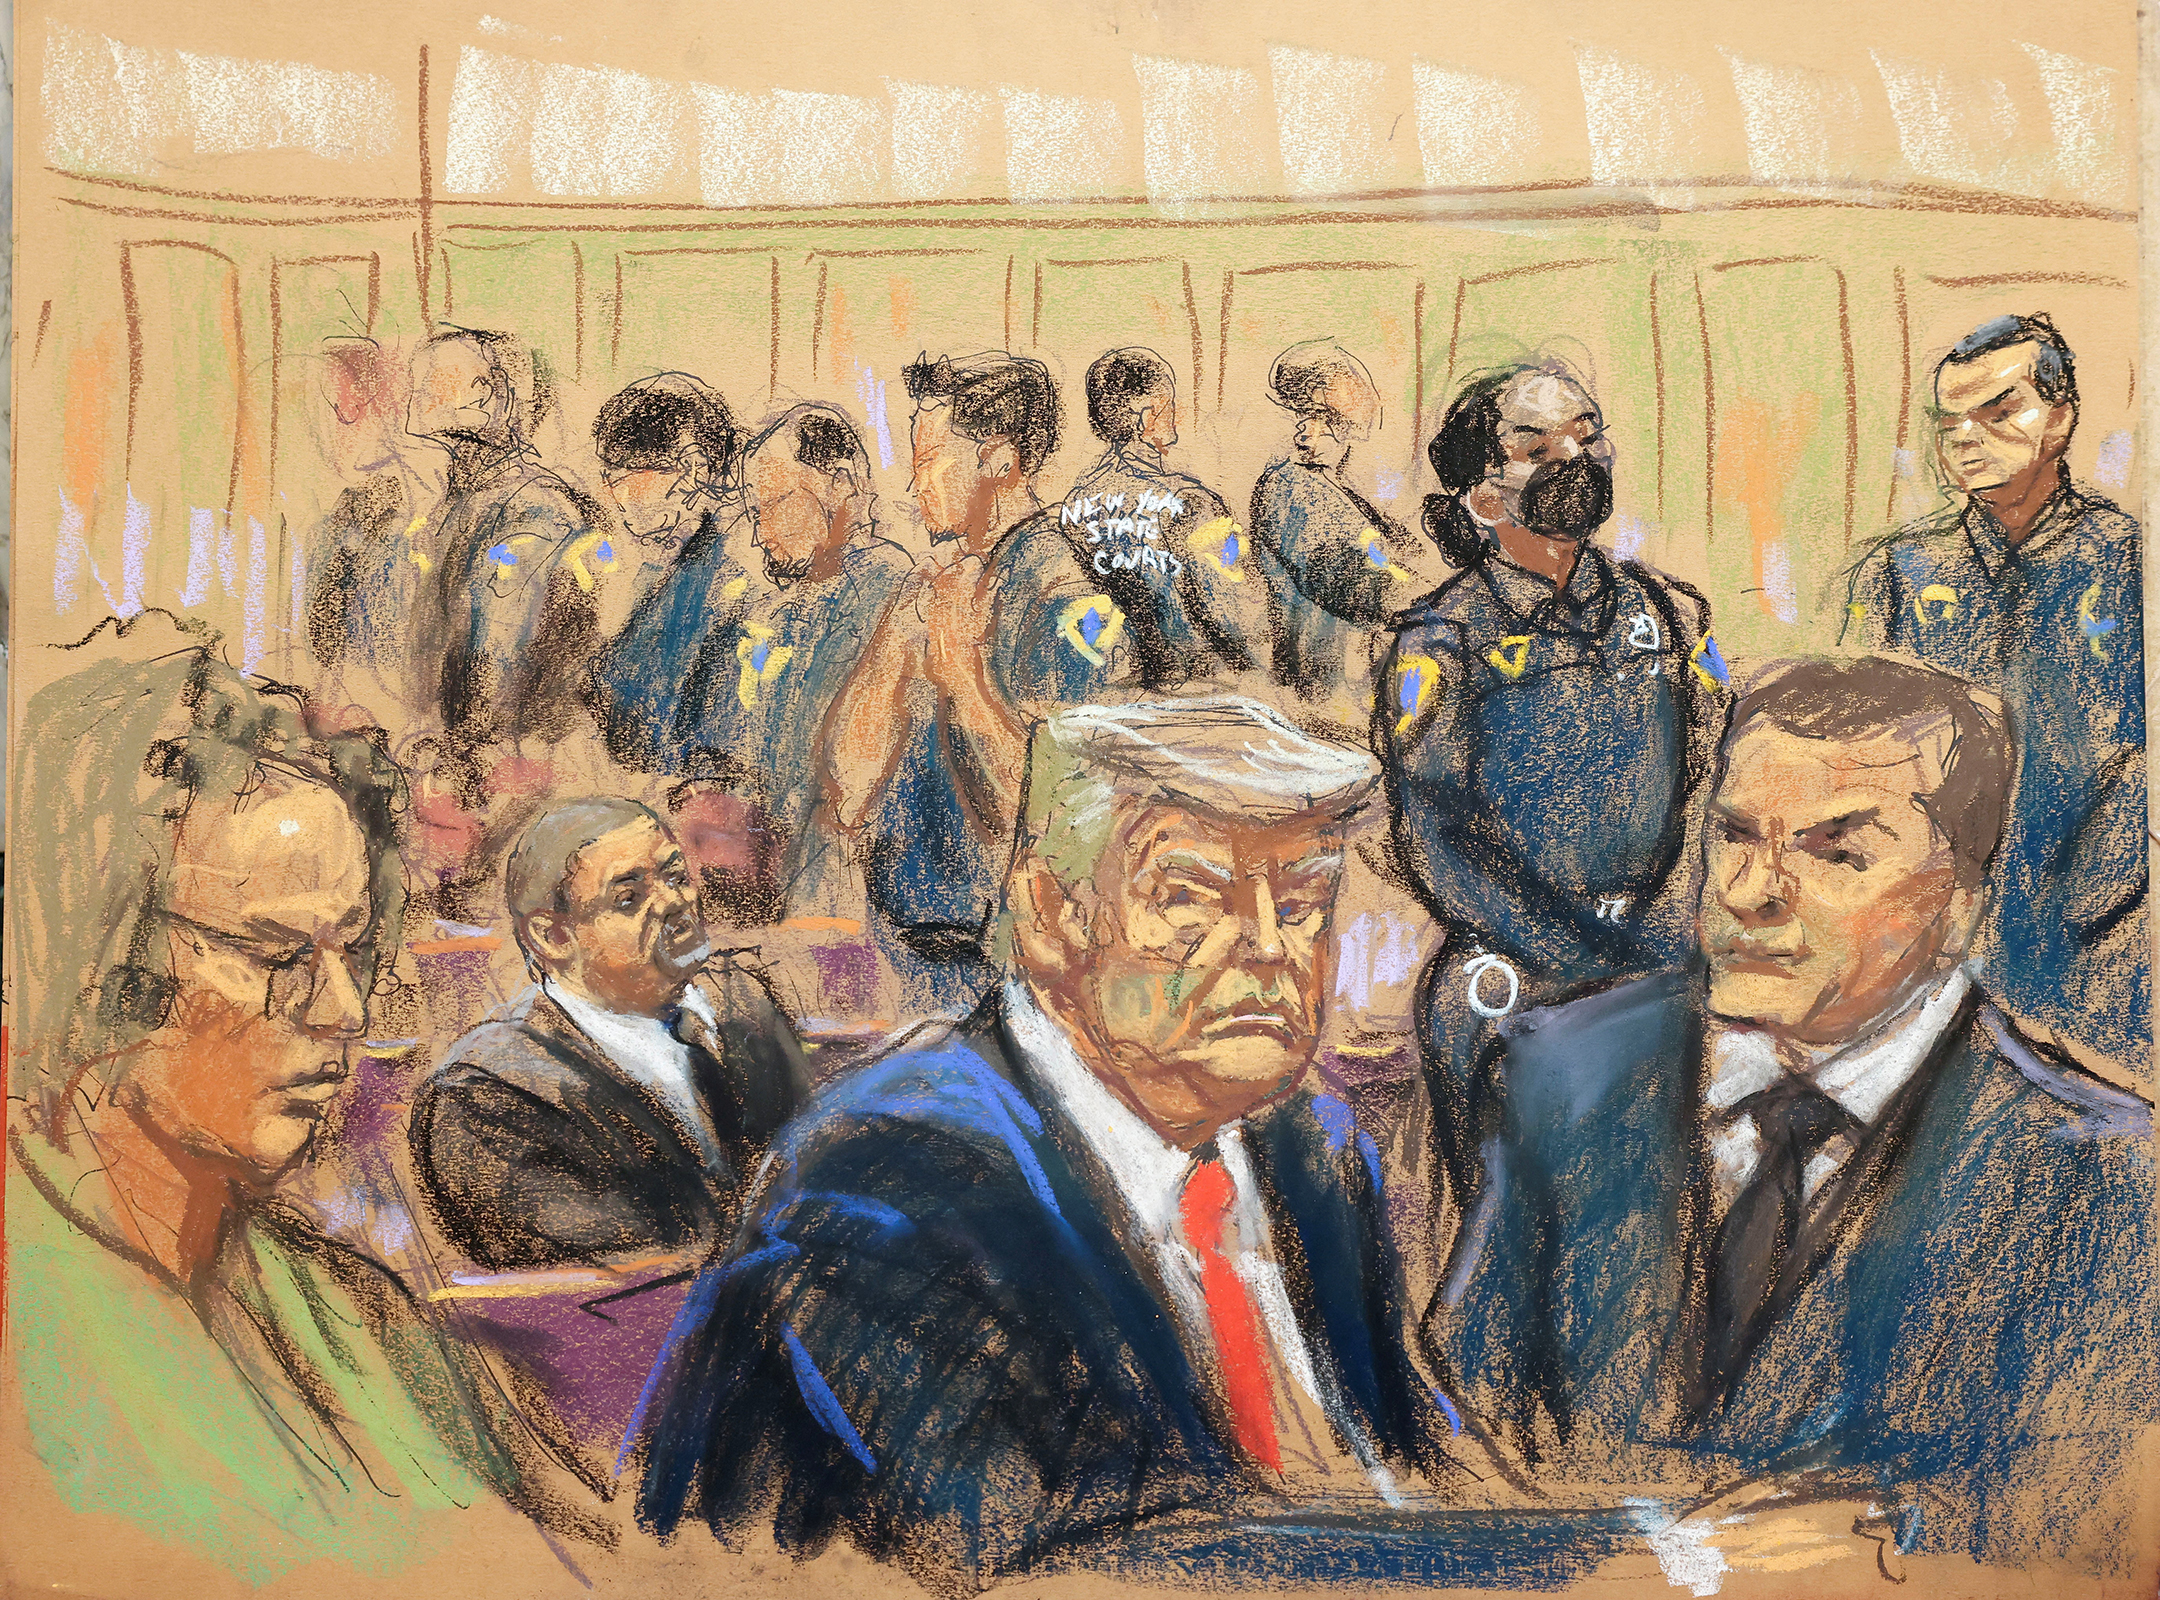 Former President Donald Trump appears in court with his legal team for an arraignment on charges stemming from his indictment by a Manhattan grand jury following a probe into hush money paid to porn star Stormy Daniels, in New York City on April 4 in this courtroom sketch.